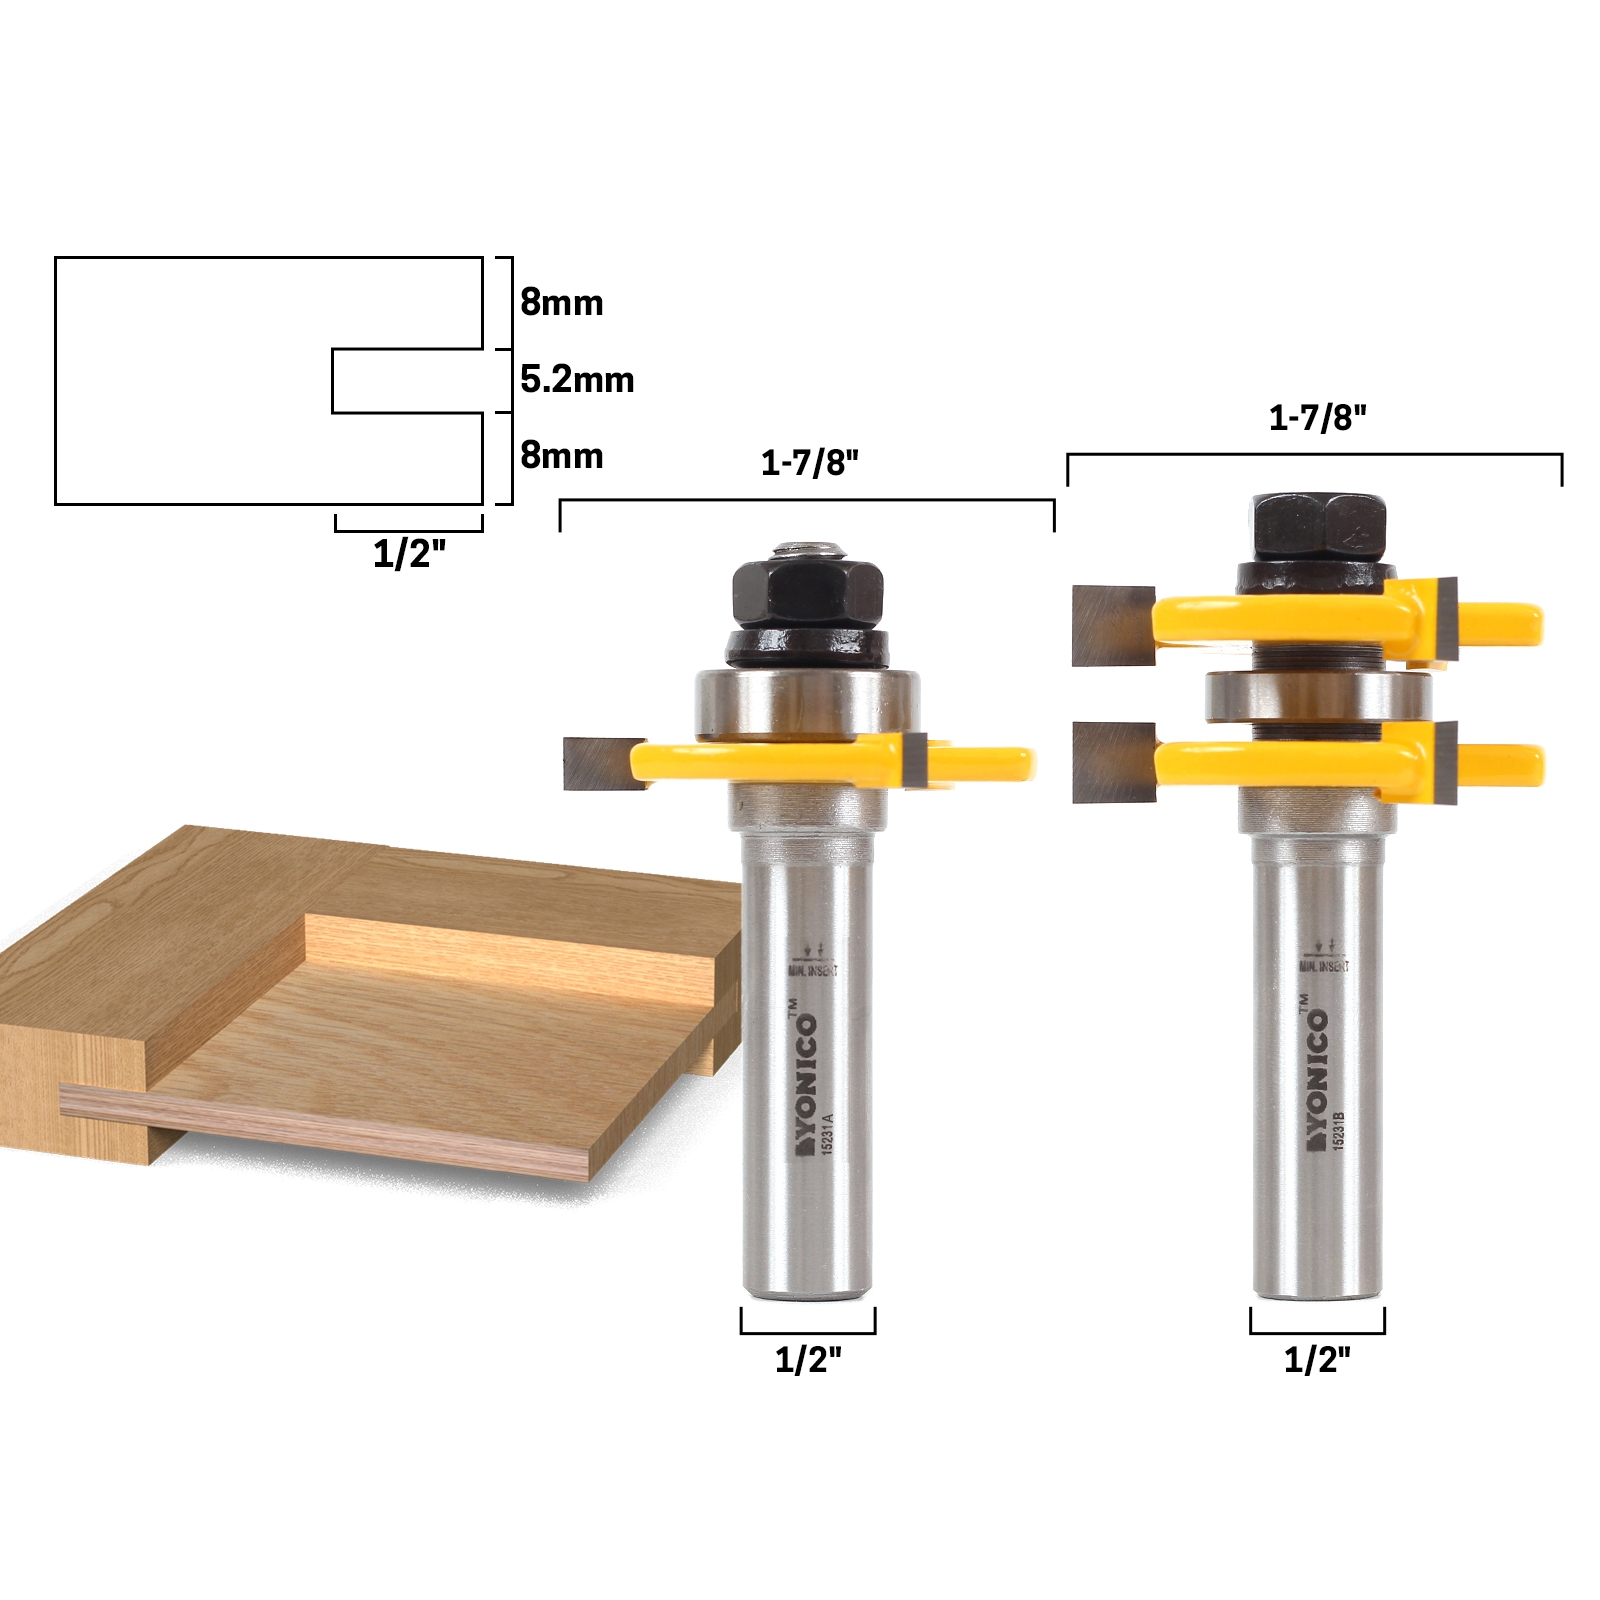 2 pc 1/2" Sh 1/4"x1/4" Tongue & Groove Joint Assembly Router Bit Set S